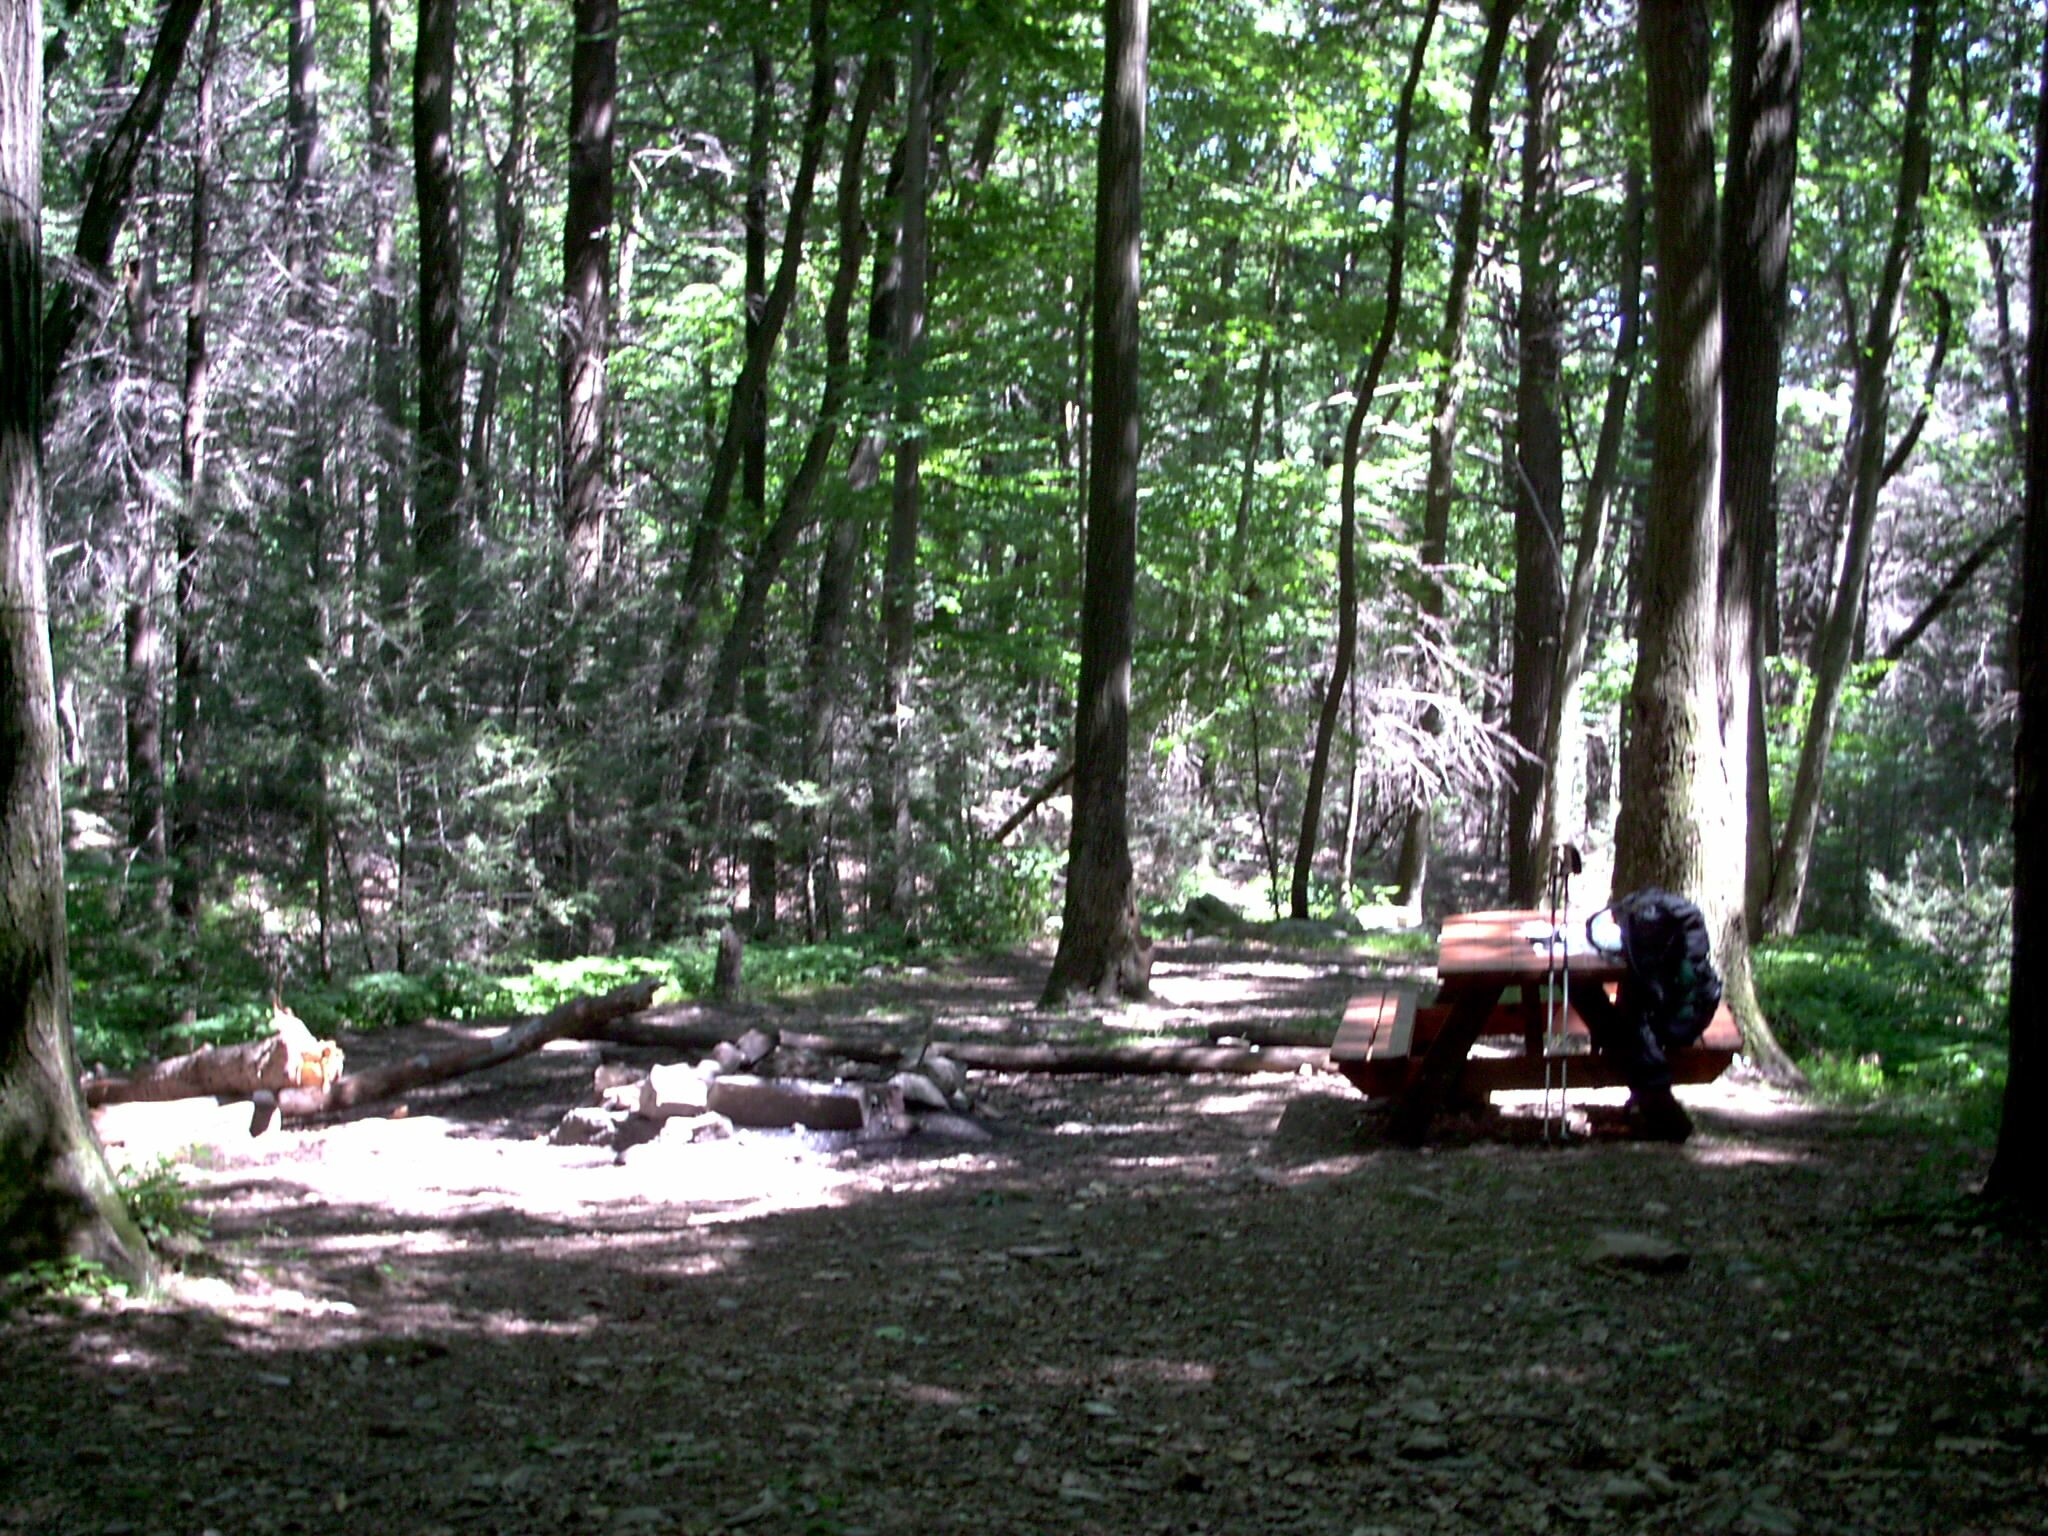 mm 3.7 - The picnic table and fire ring at Hertlein campsite. There are two tent sites in the background and two more across the small creek to the right.  Courtesy stewartriley@earthlink.net